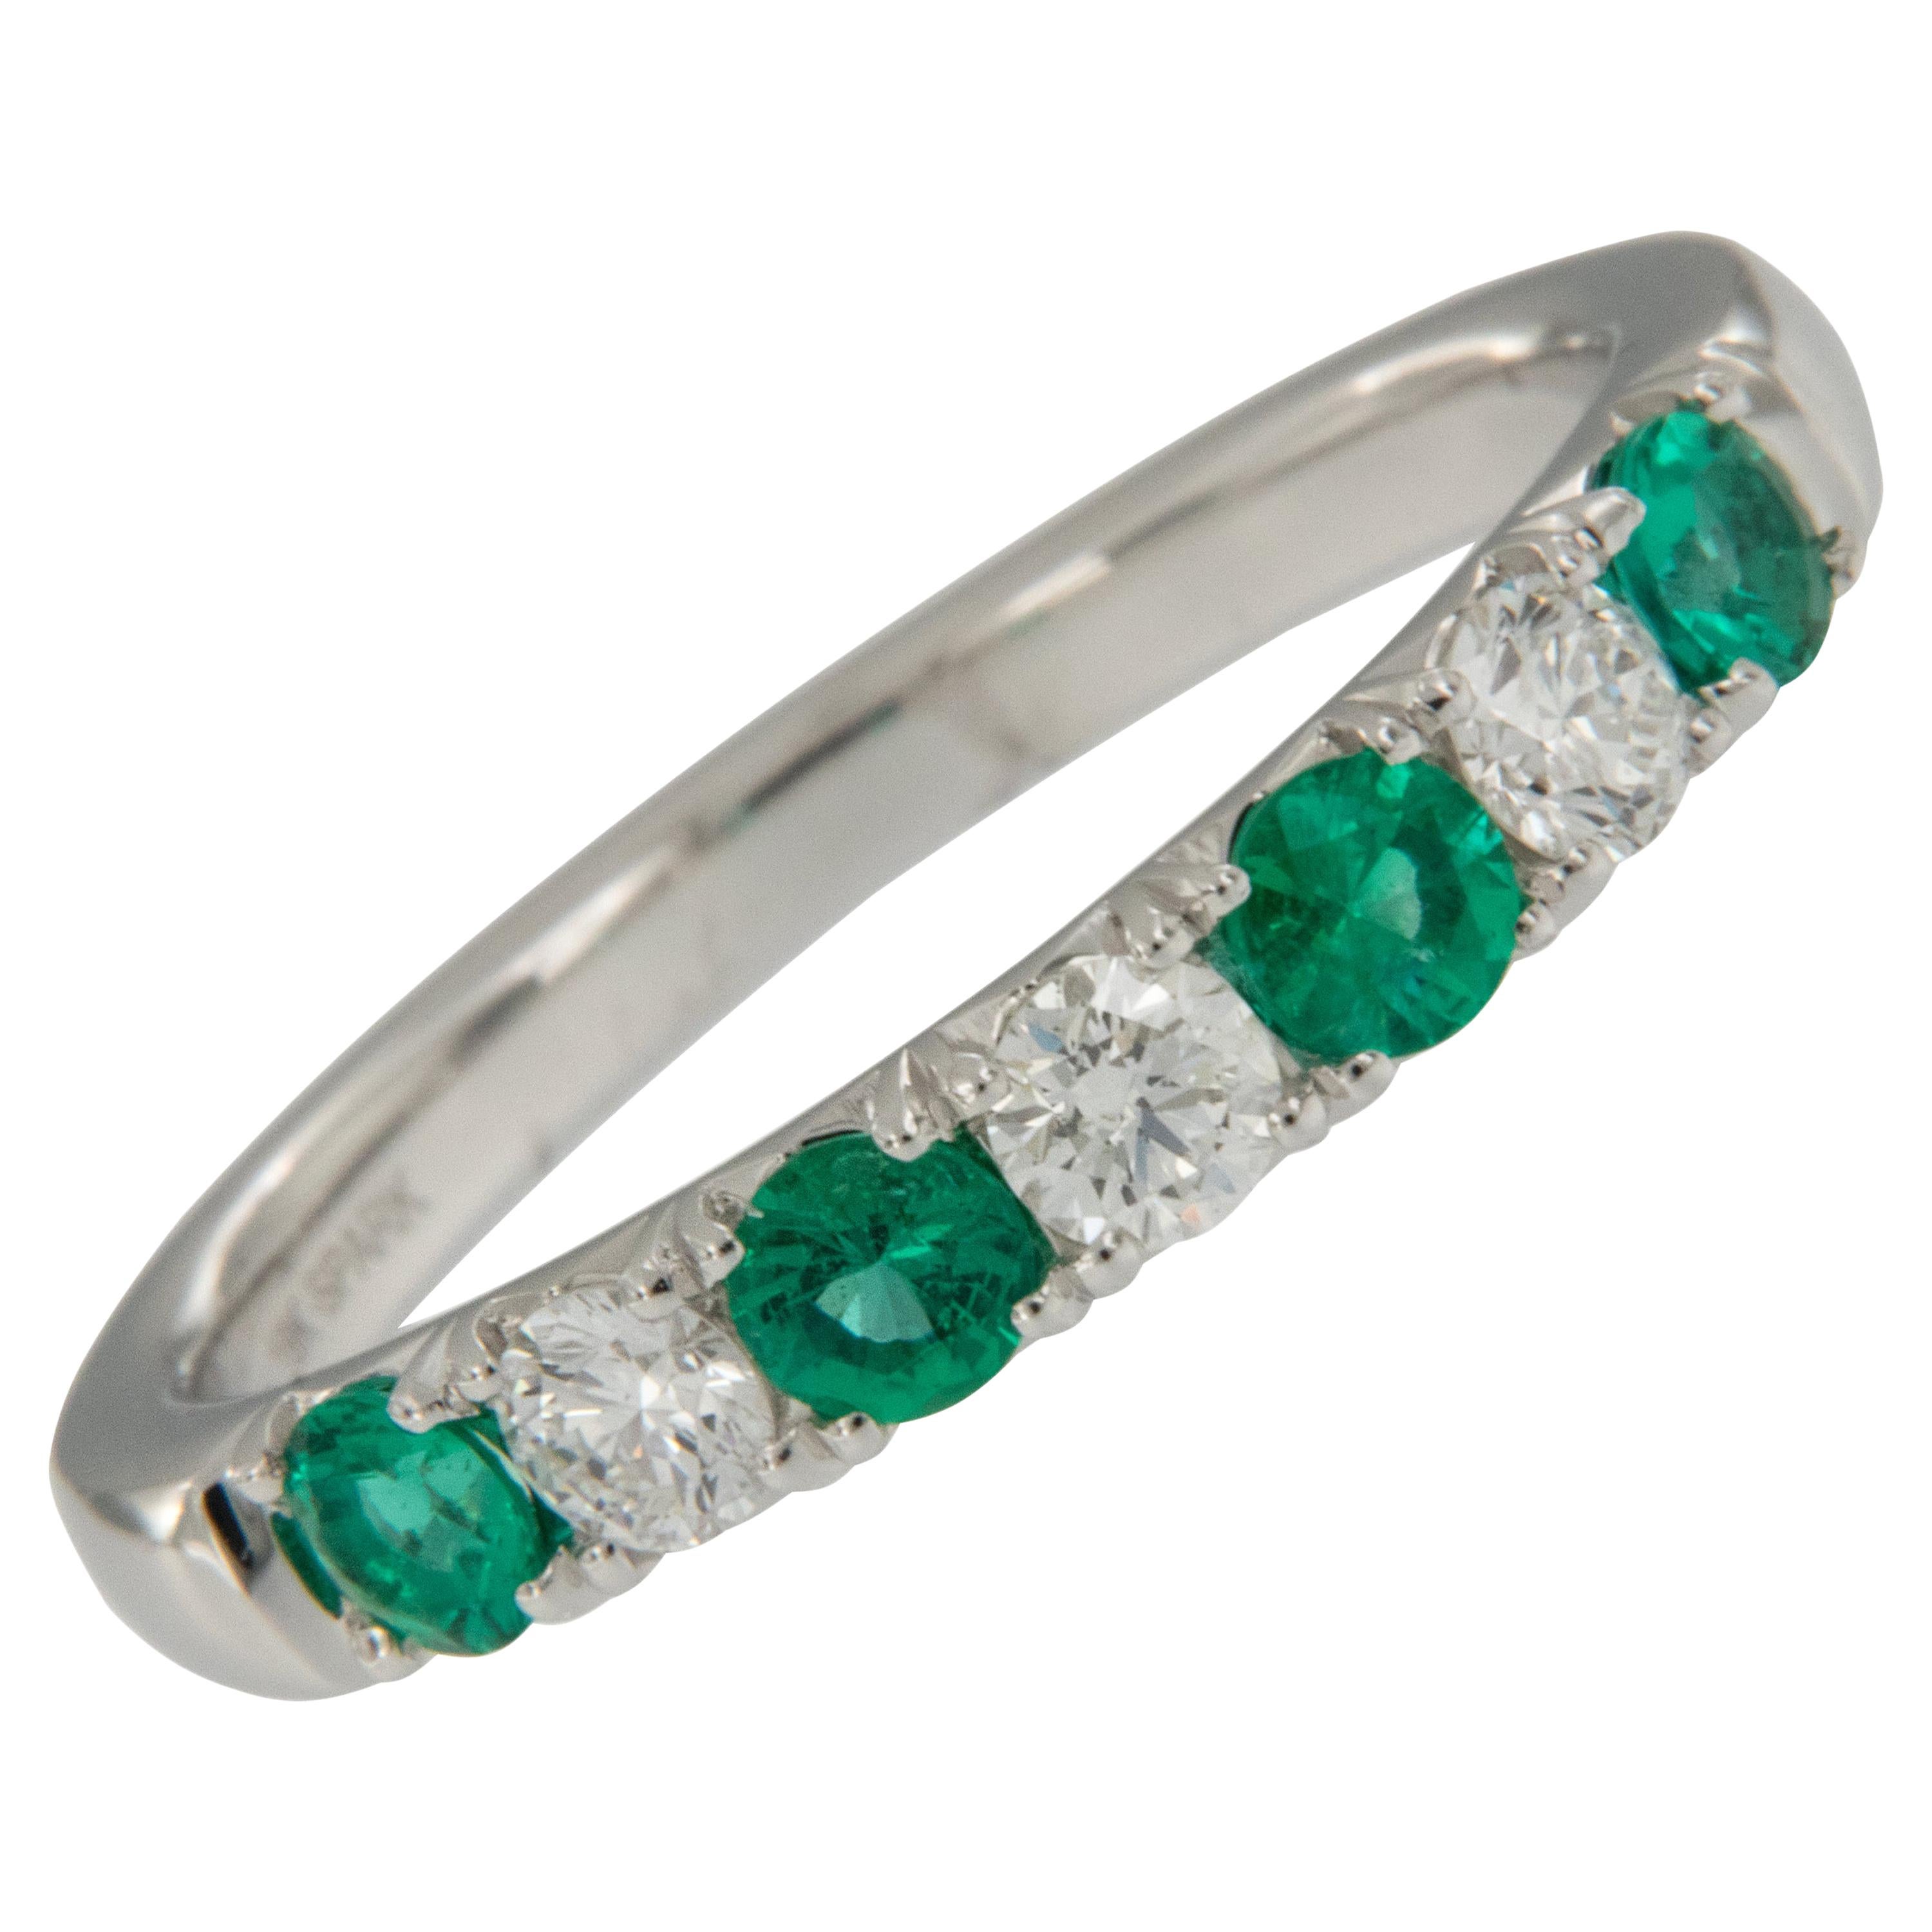 18 Karat White Gold Emerald & Diamond Stackable Band Ring by Spark Creations